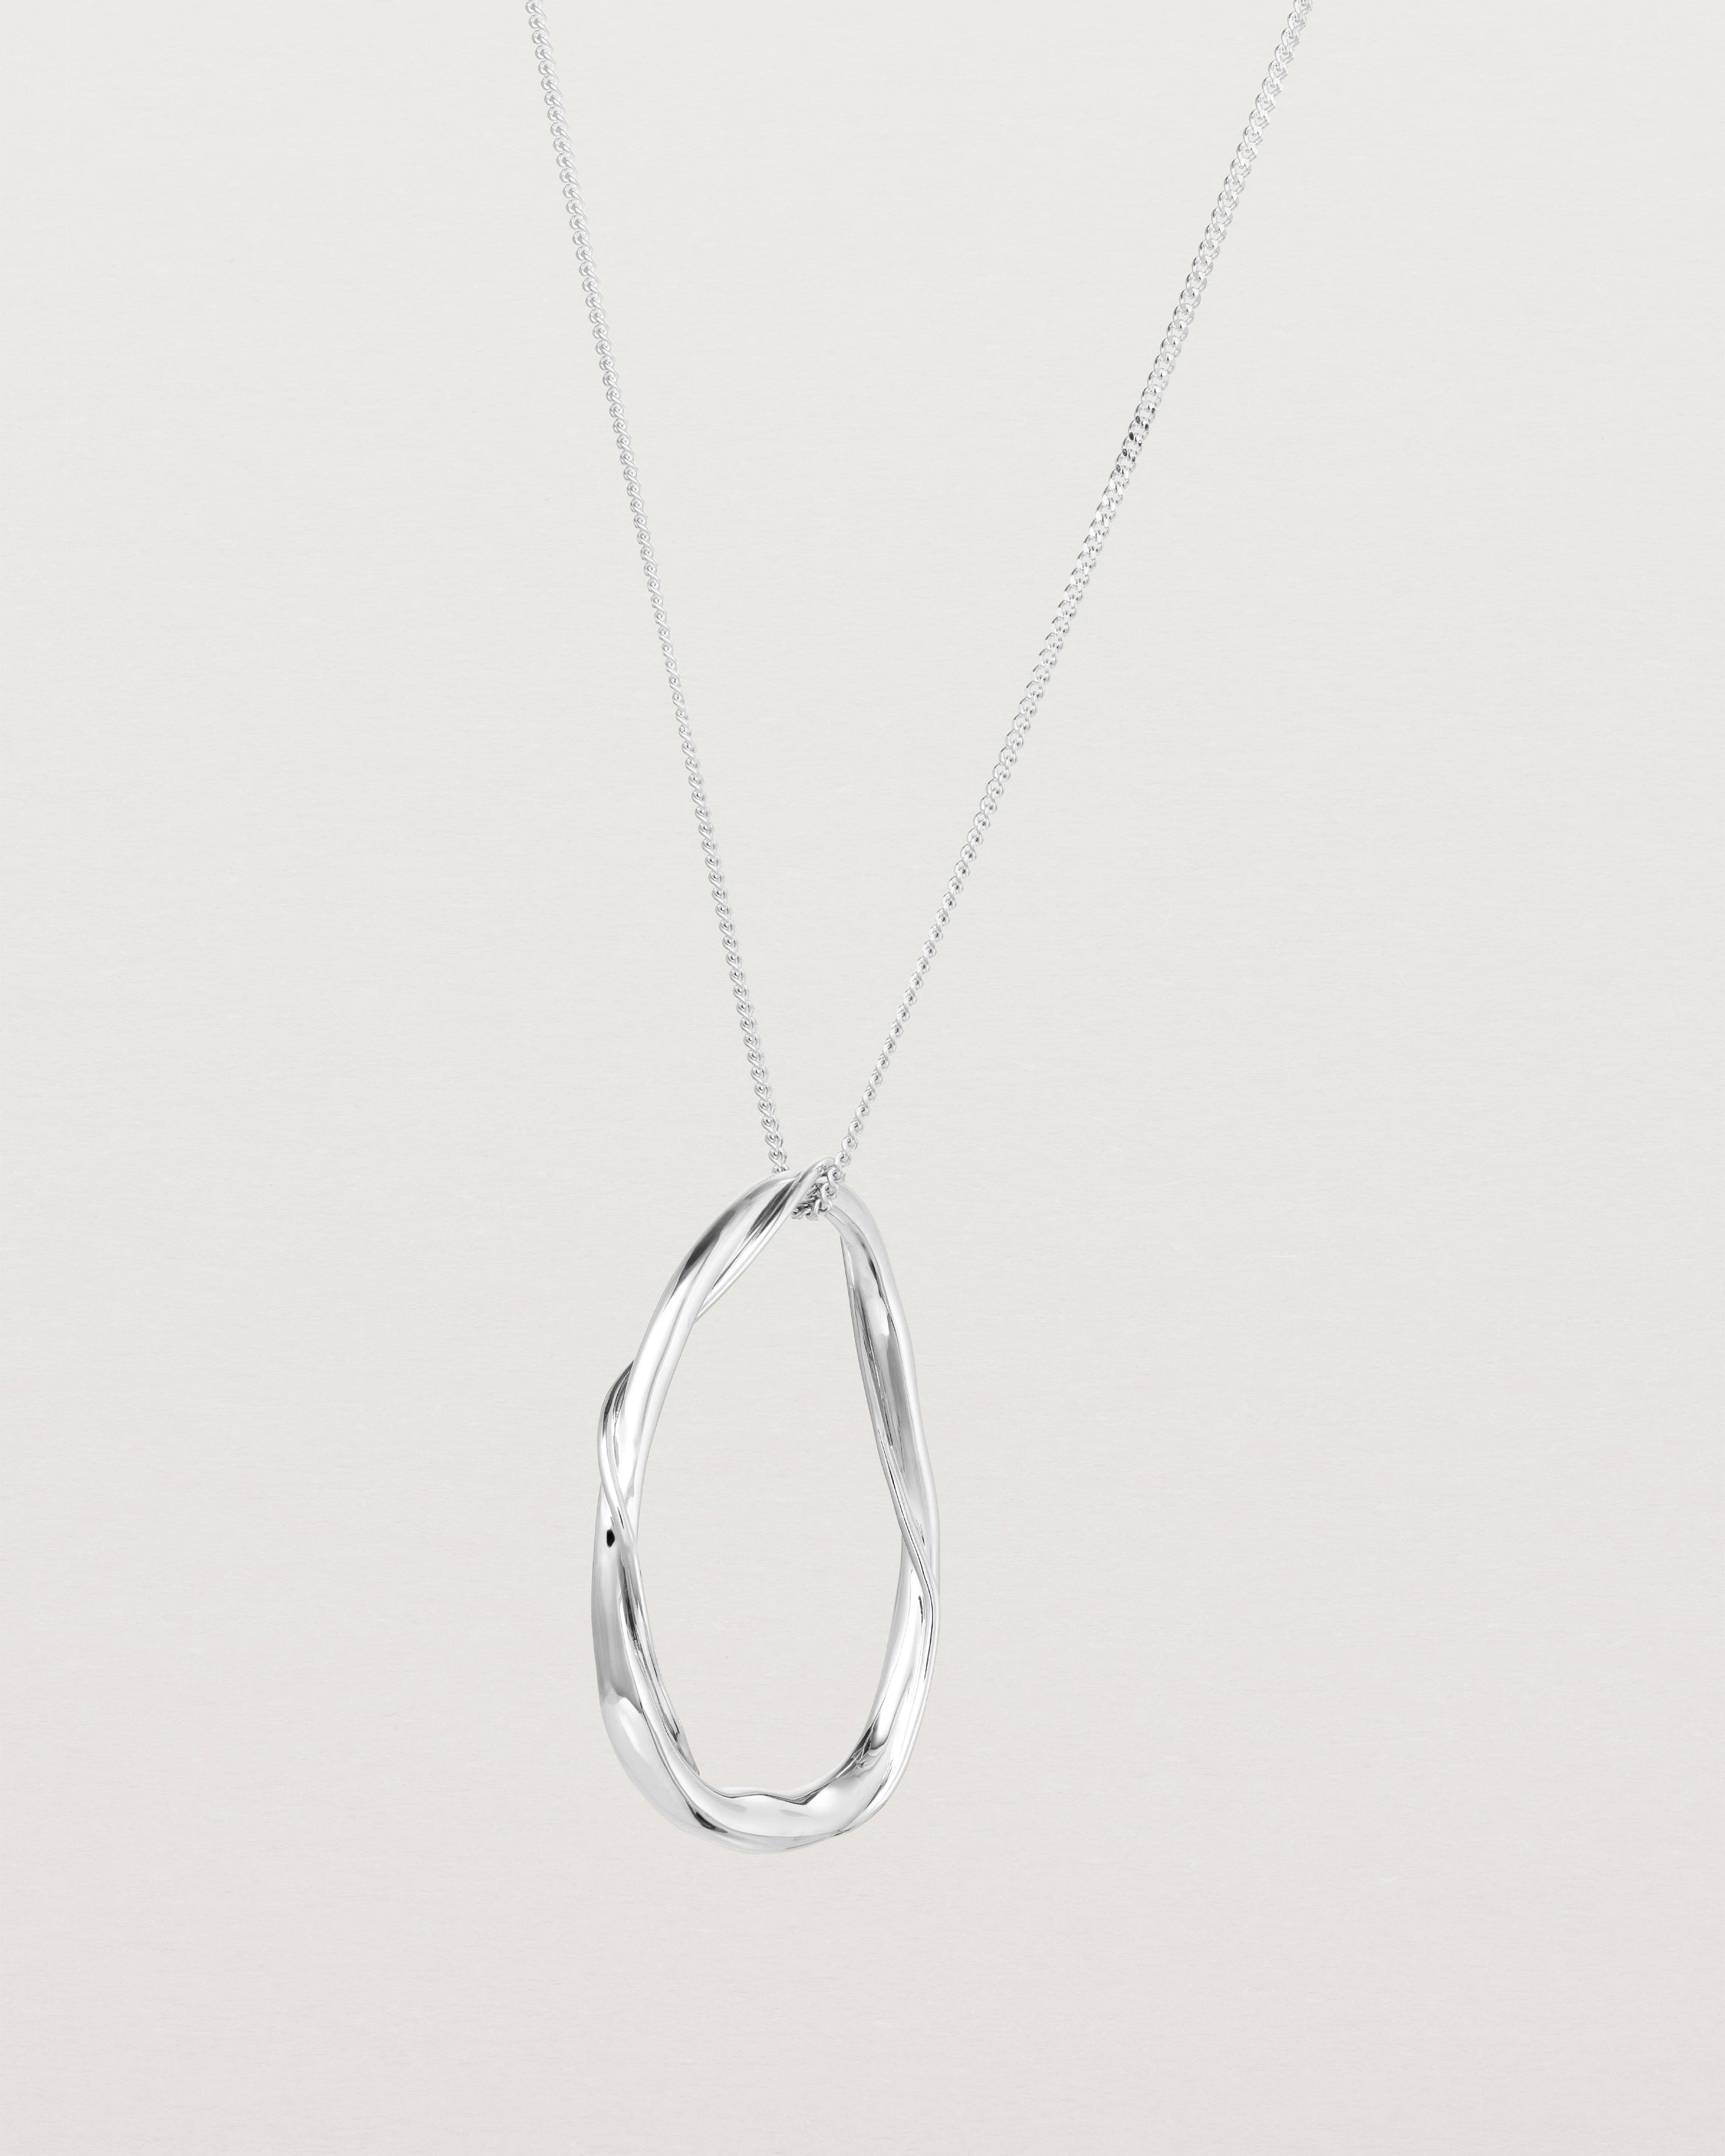 Angled view of the Dalí Necklace in sterling silver.